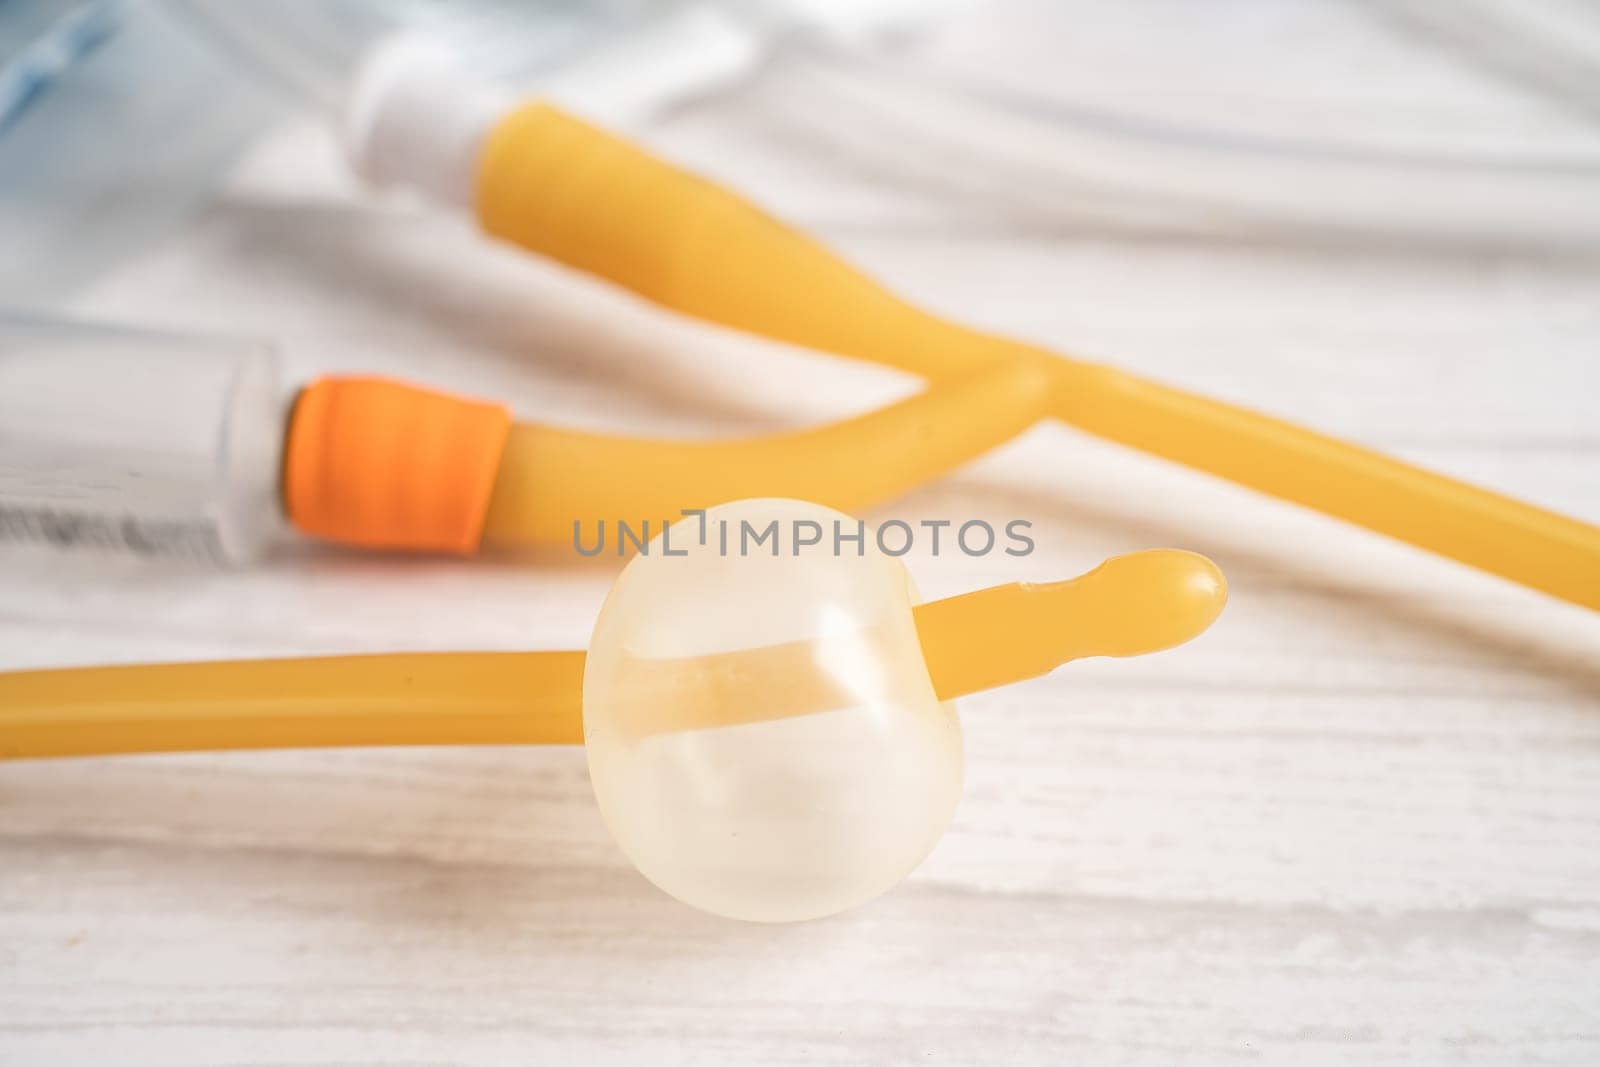 Foley urinary catheter with urine bag for disability or patient in hospital. by pamai